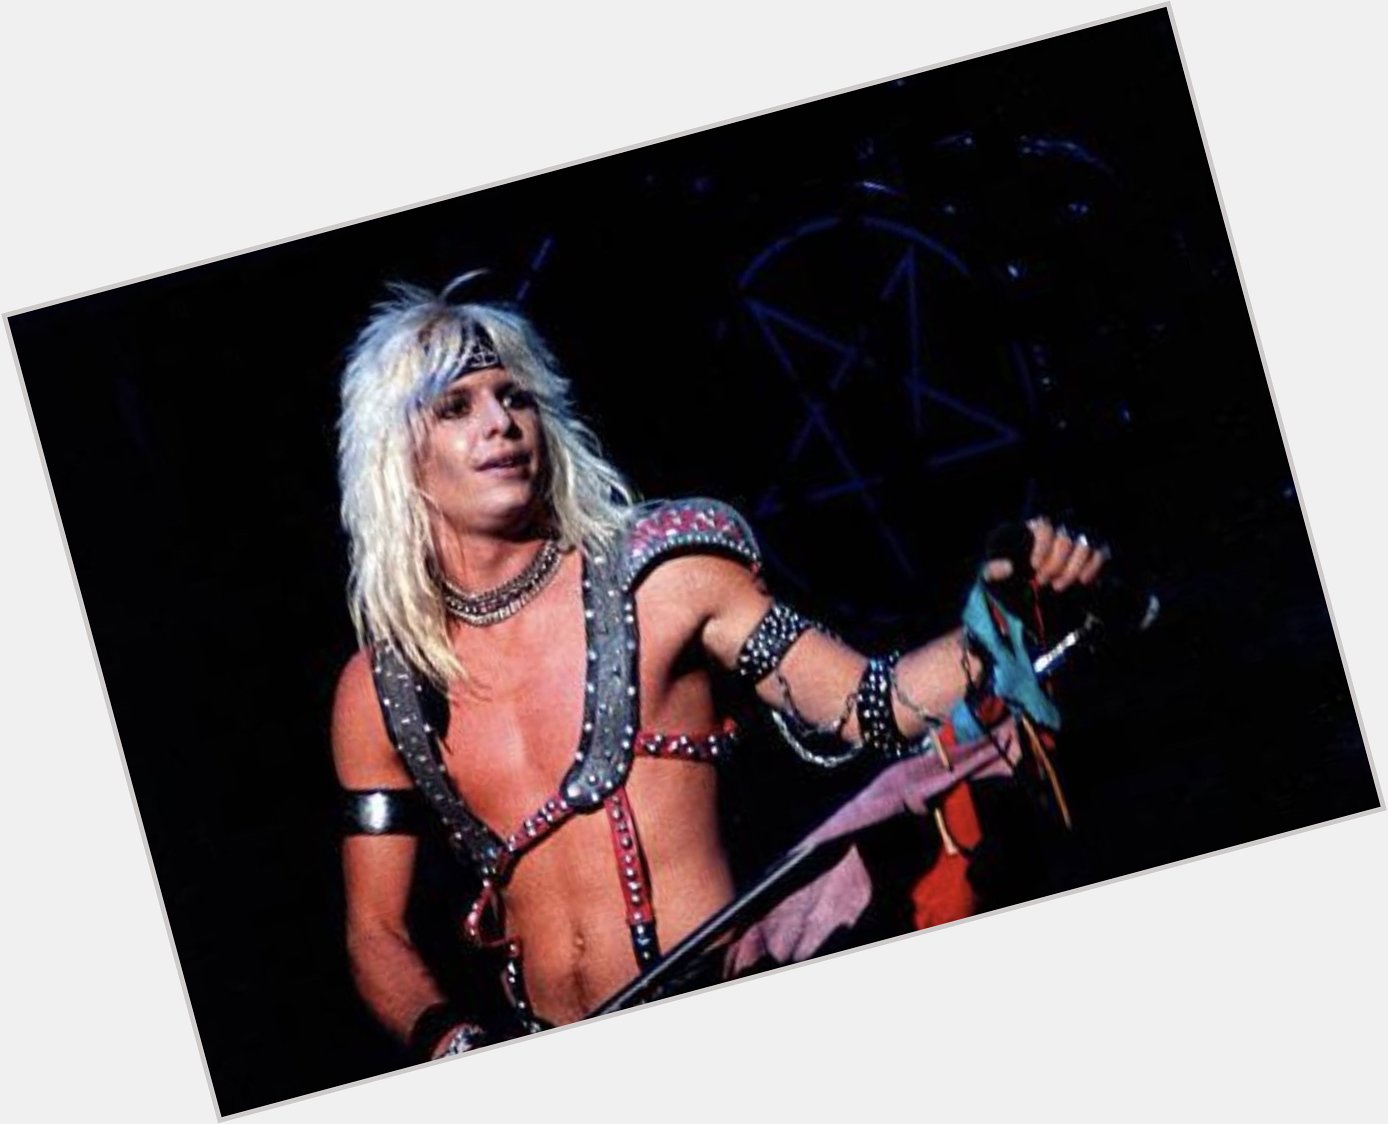 Happy Birthday to the Crüe s own Vince Neil! 